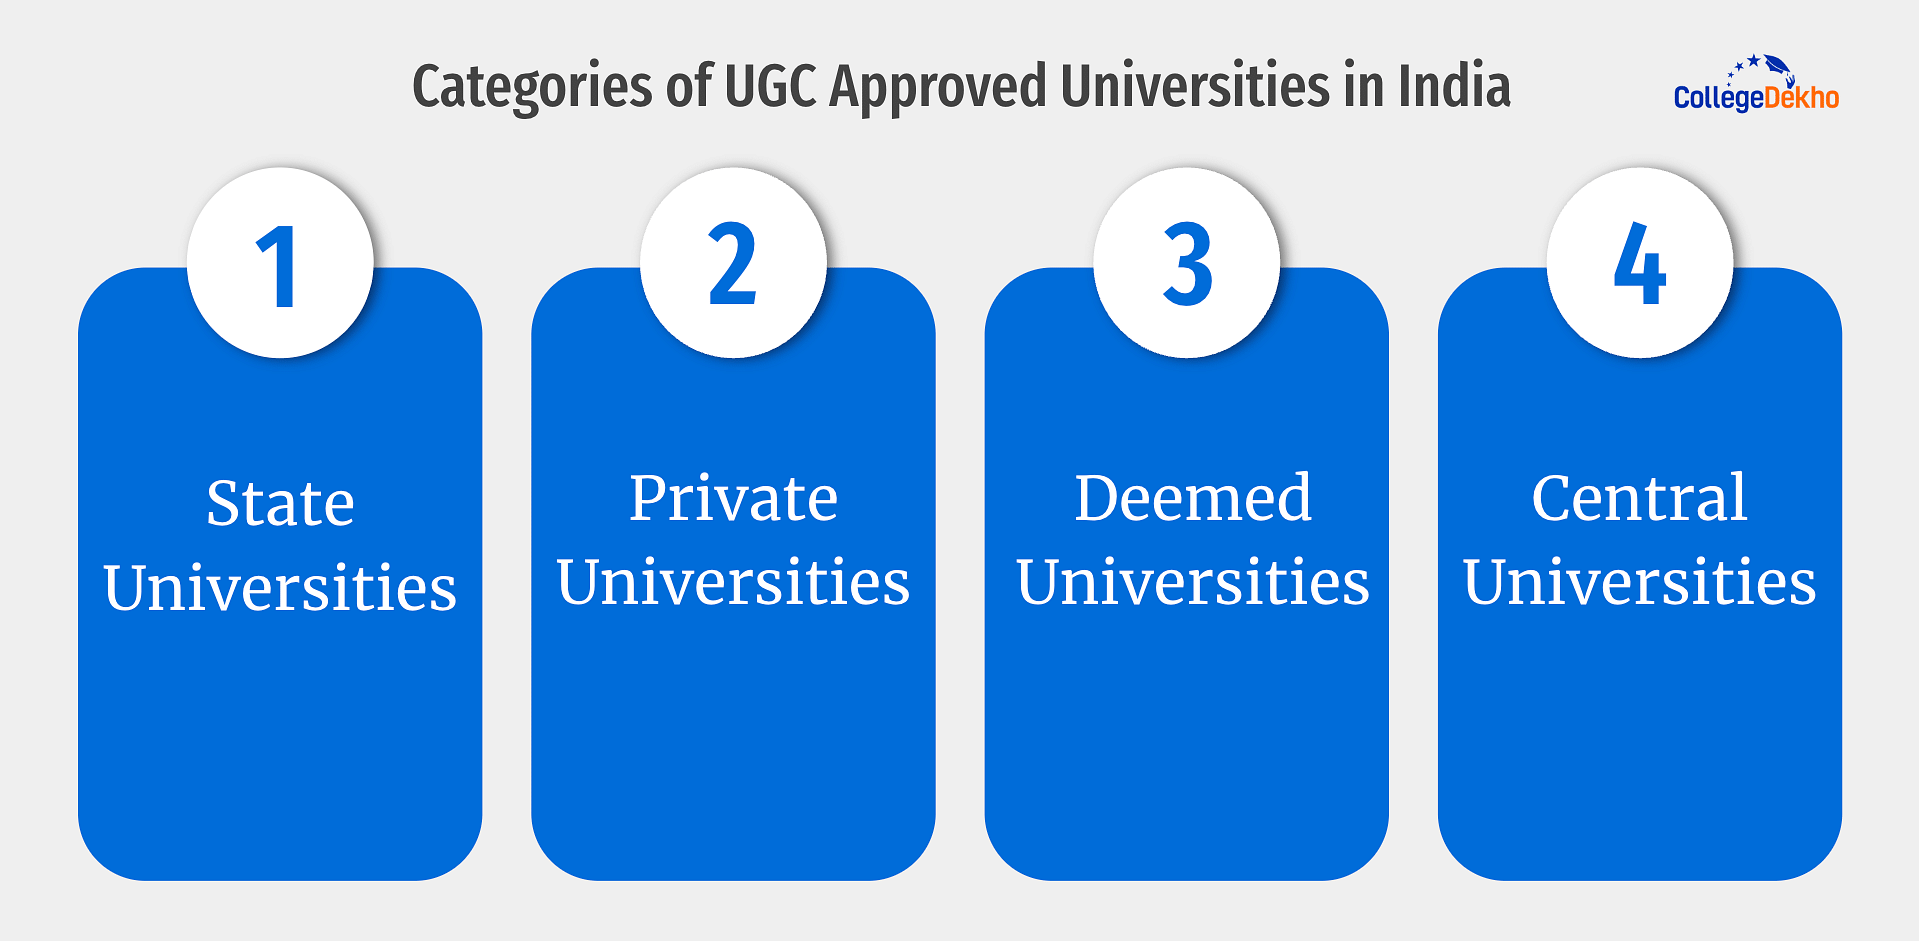 Categories of UGC-Approved Universities in India